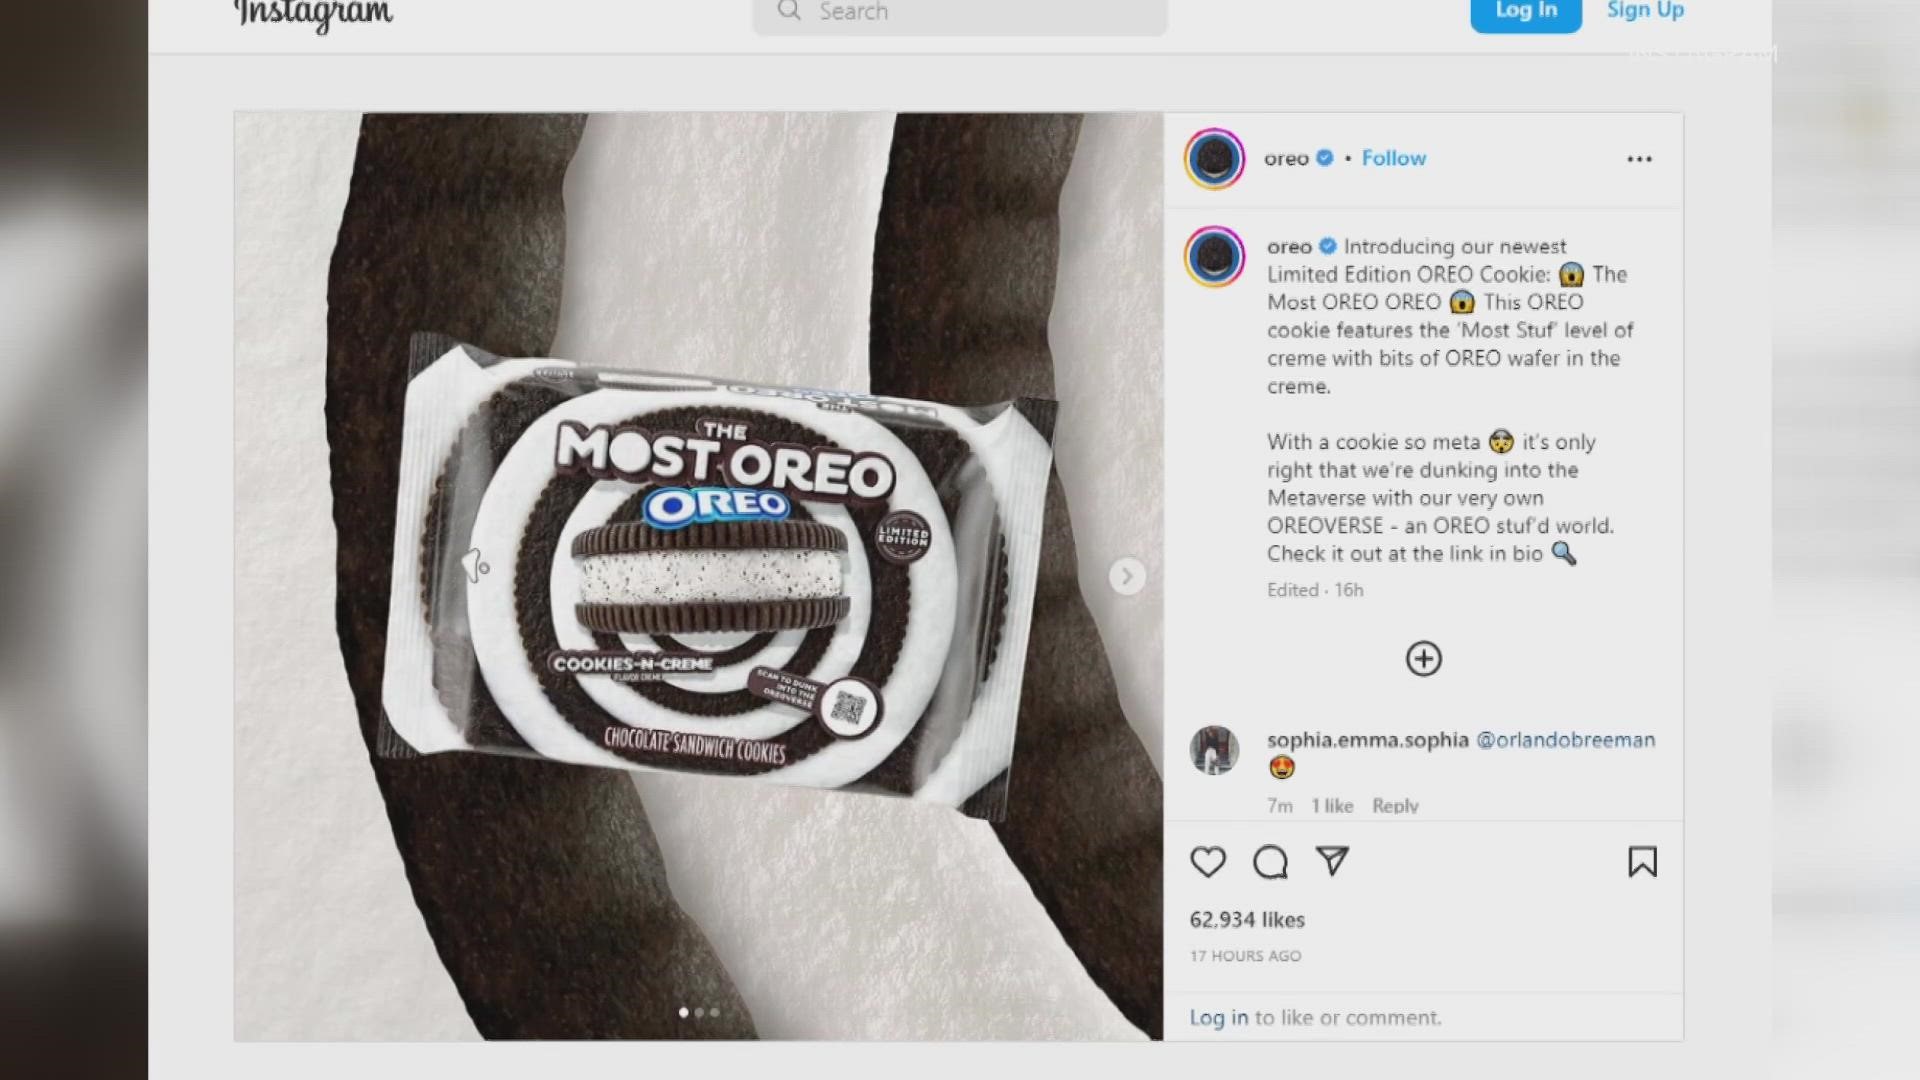 The company is also launching the Oreo-verse, an online Metaverse experience. You can play cookie-themed games and try for a chance to win $50,000.